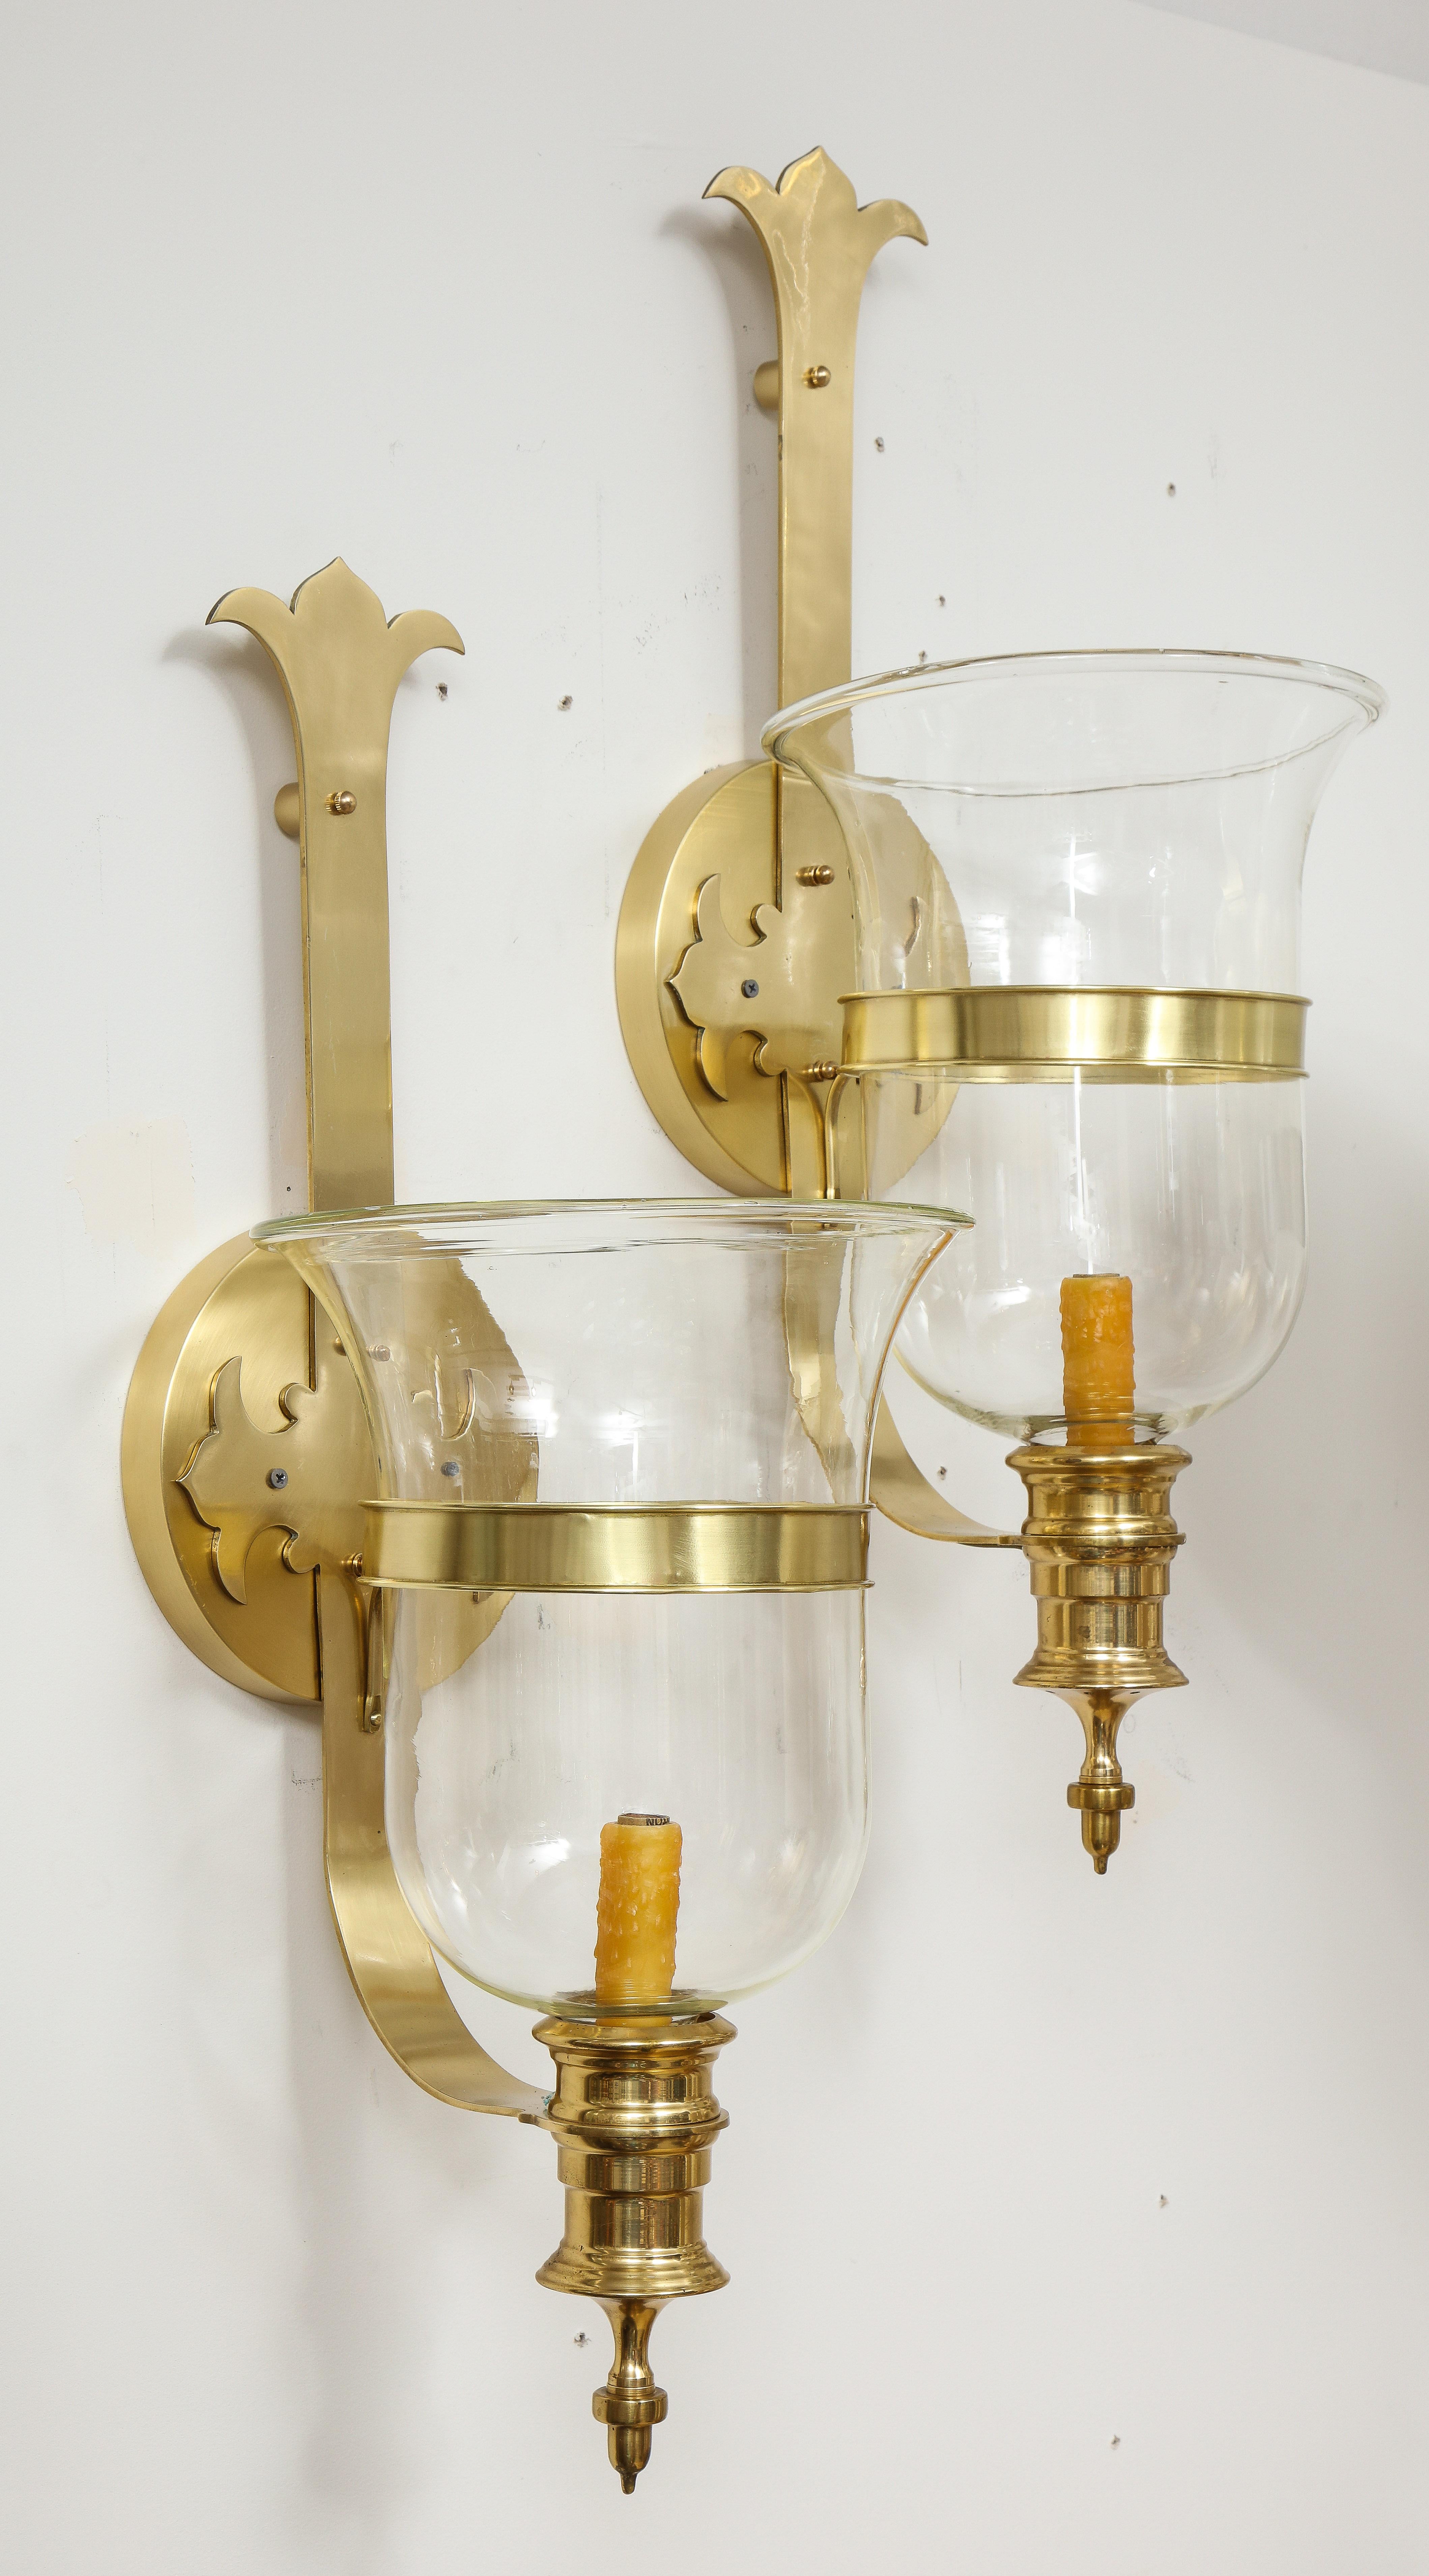 Pair of 1970s Large Hurricane glass sconces.
The polished brass sconces have been Newly rewired and take a Candelabra light bulb 
with a 60 Watt Maximum.